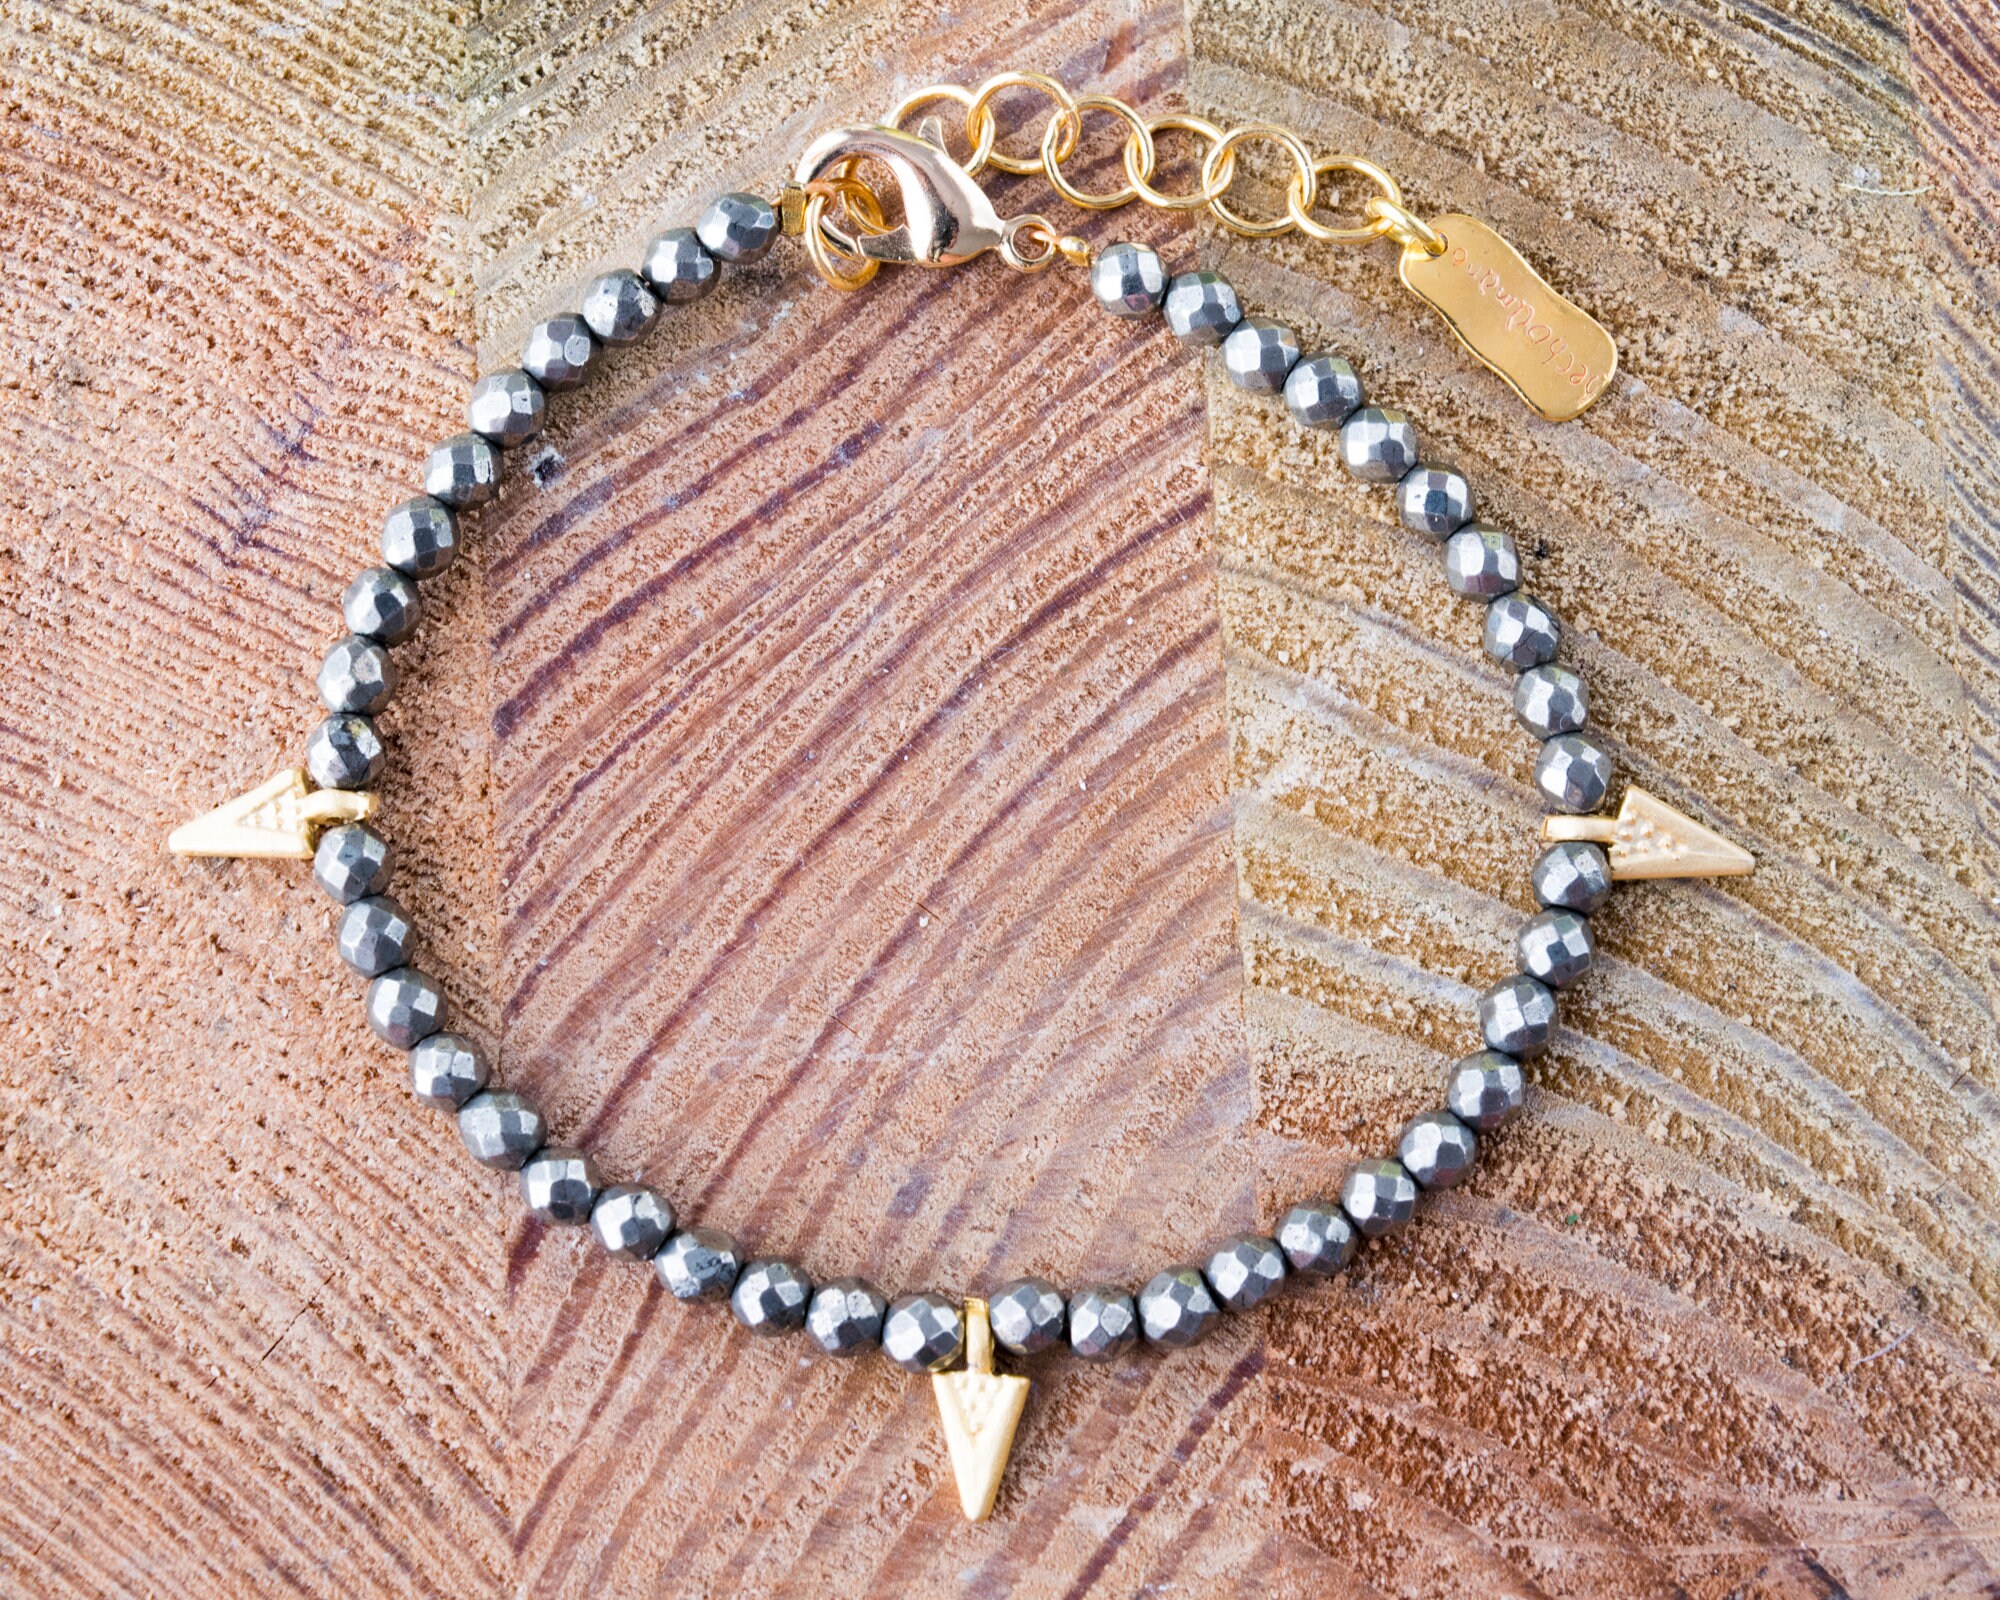 Safety Pin and Spike Bracelet | Gold, Brooklyn Jewelry 7.5 Wrist (M)